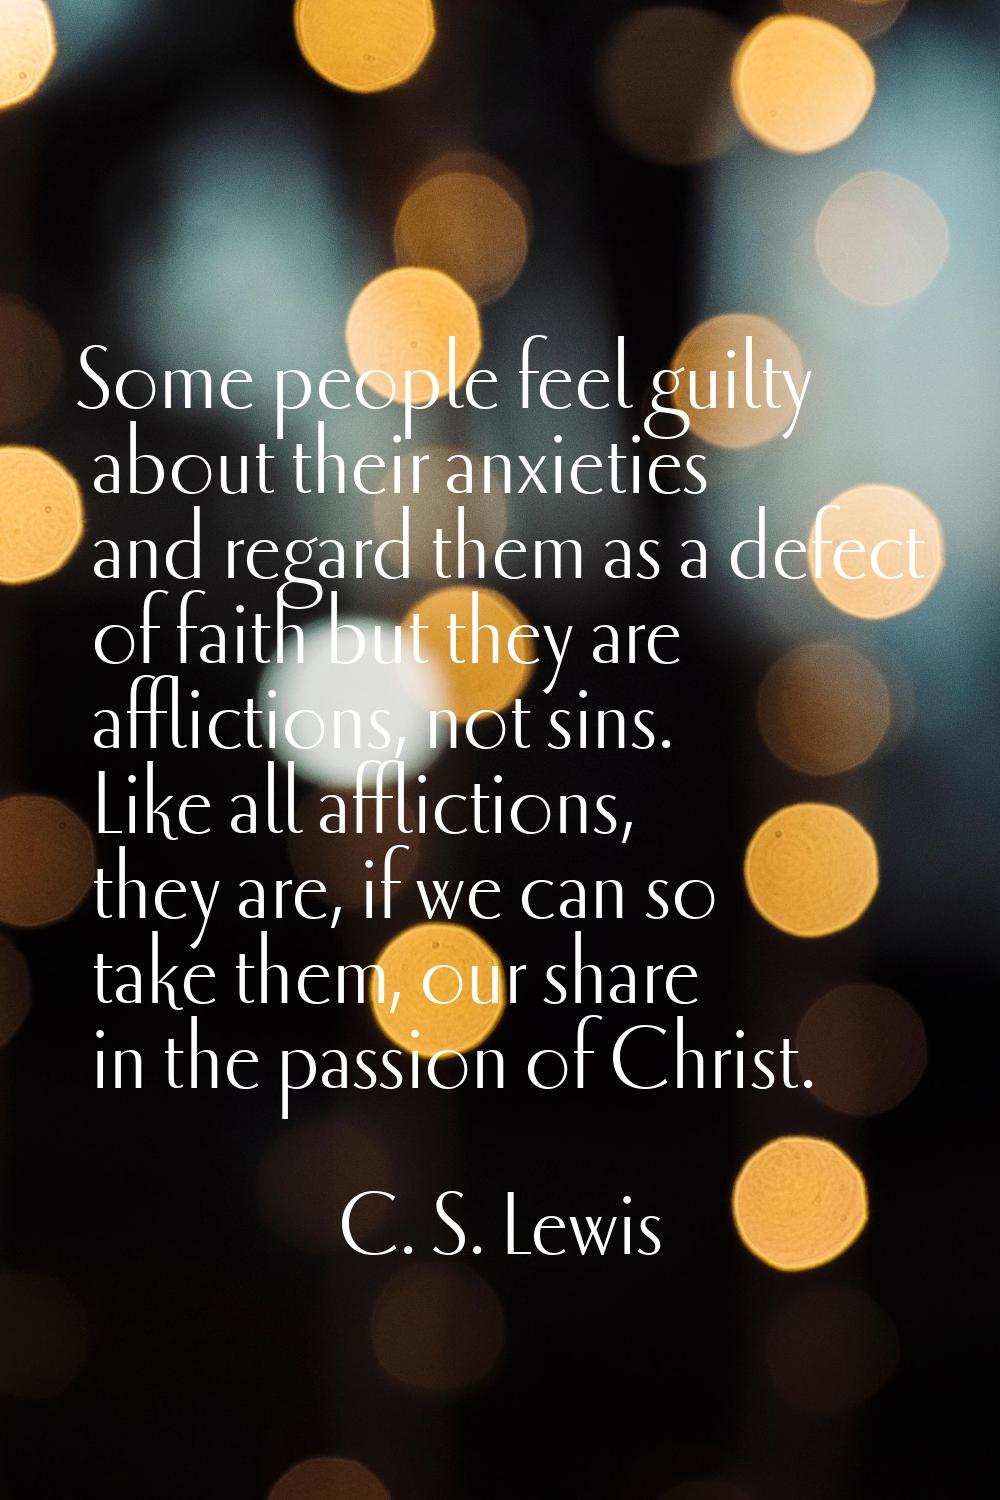 Some people feel guilty about their anxieties and regard them as a defect of faith but they are aff